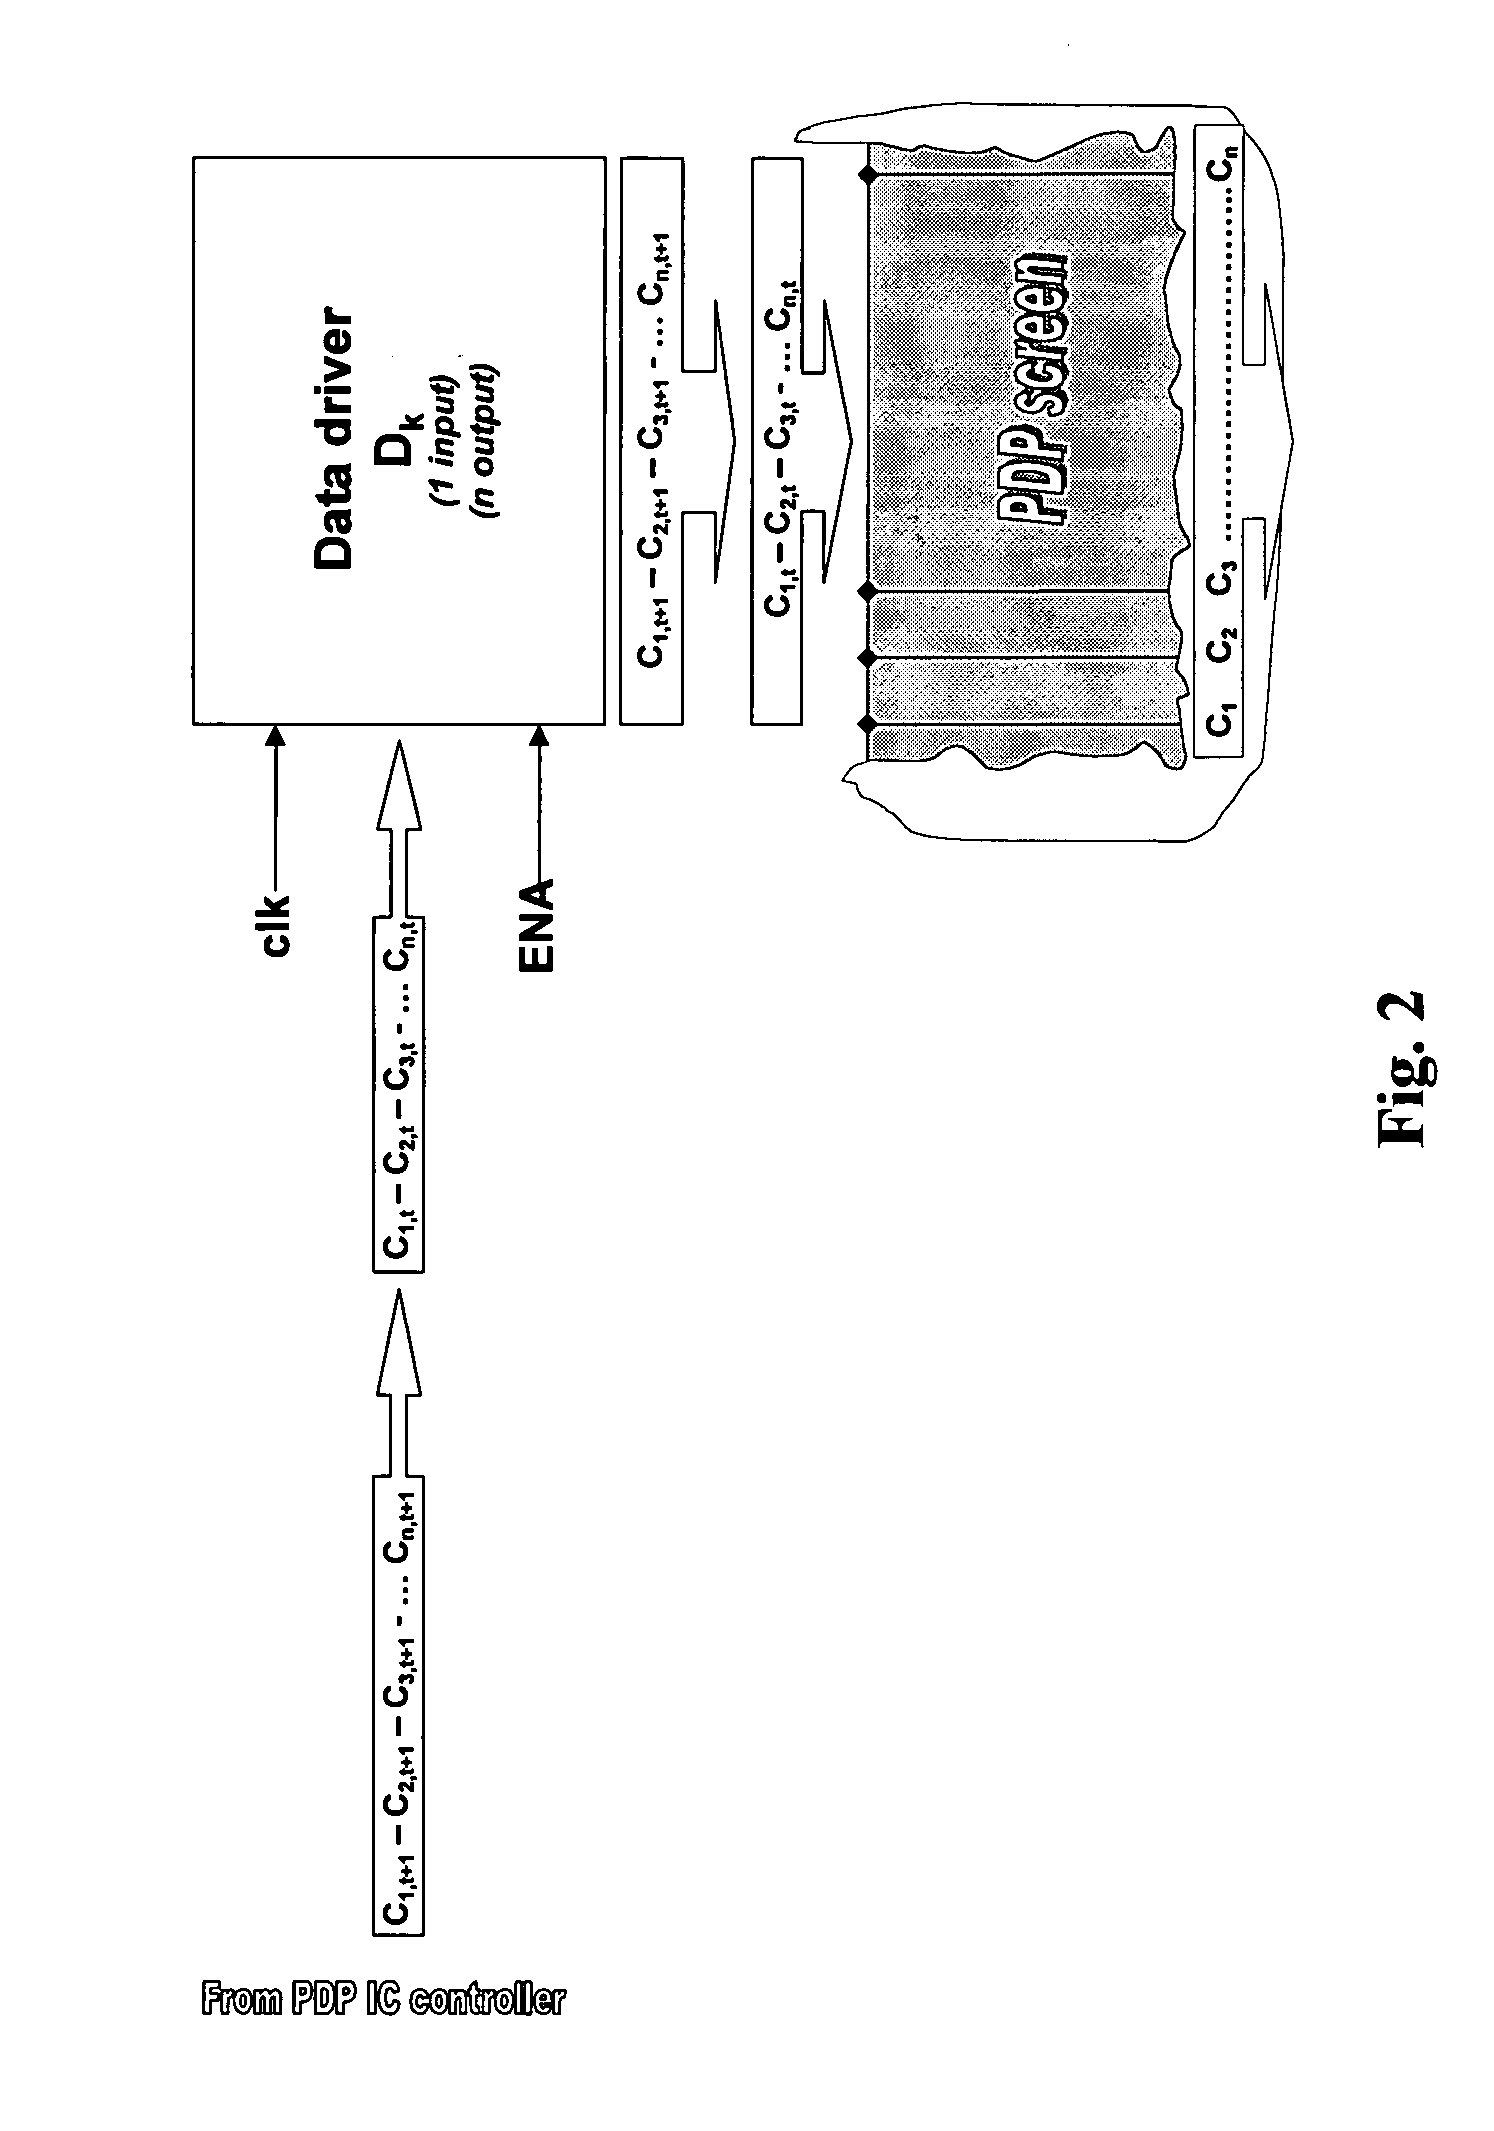 Method and apparatus for avoiding overheating of drivers of a plasma display panel